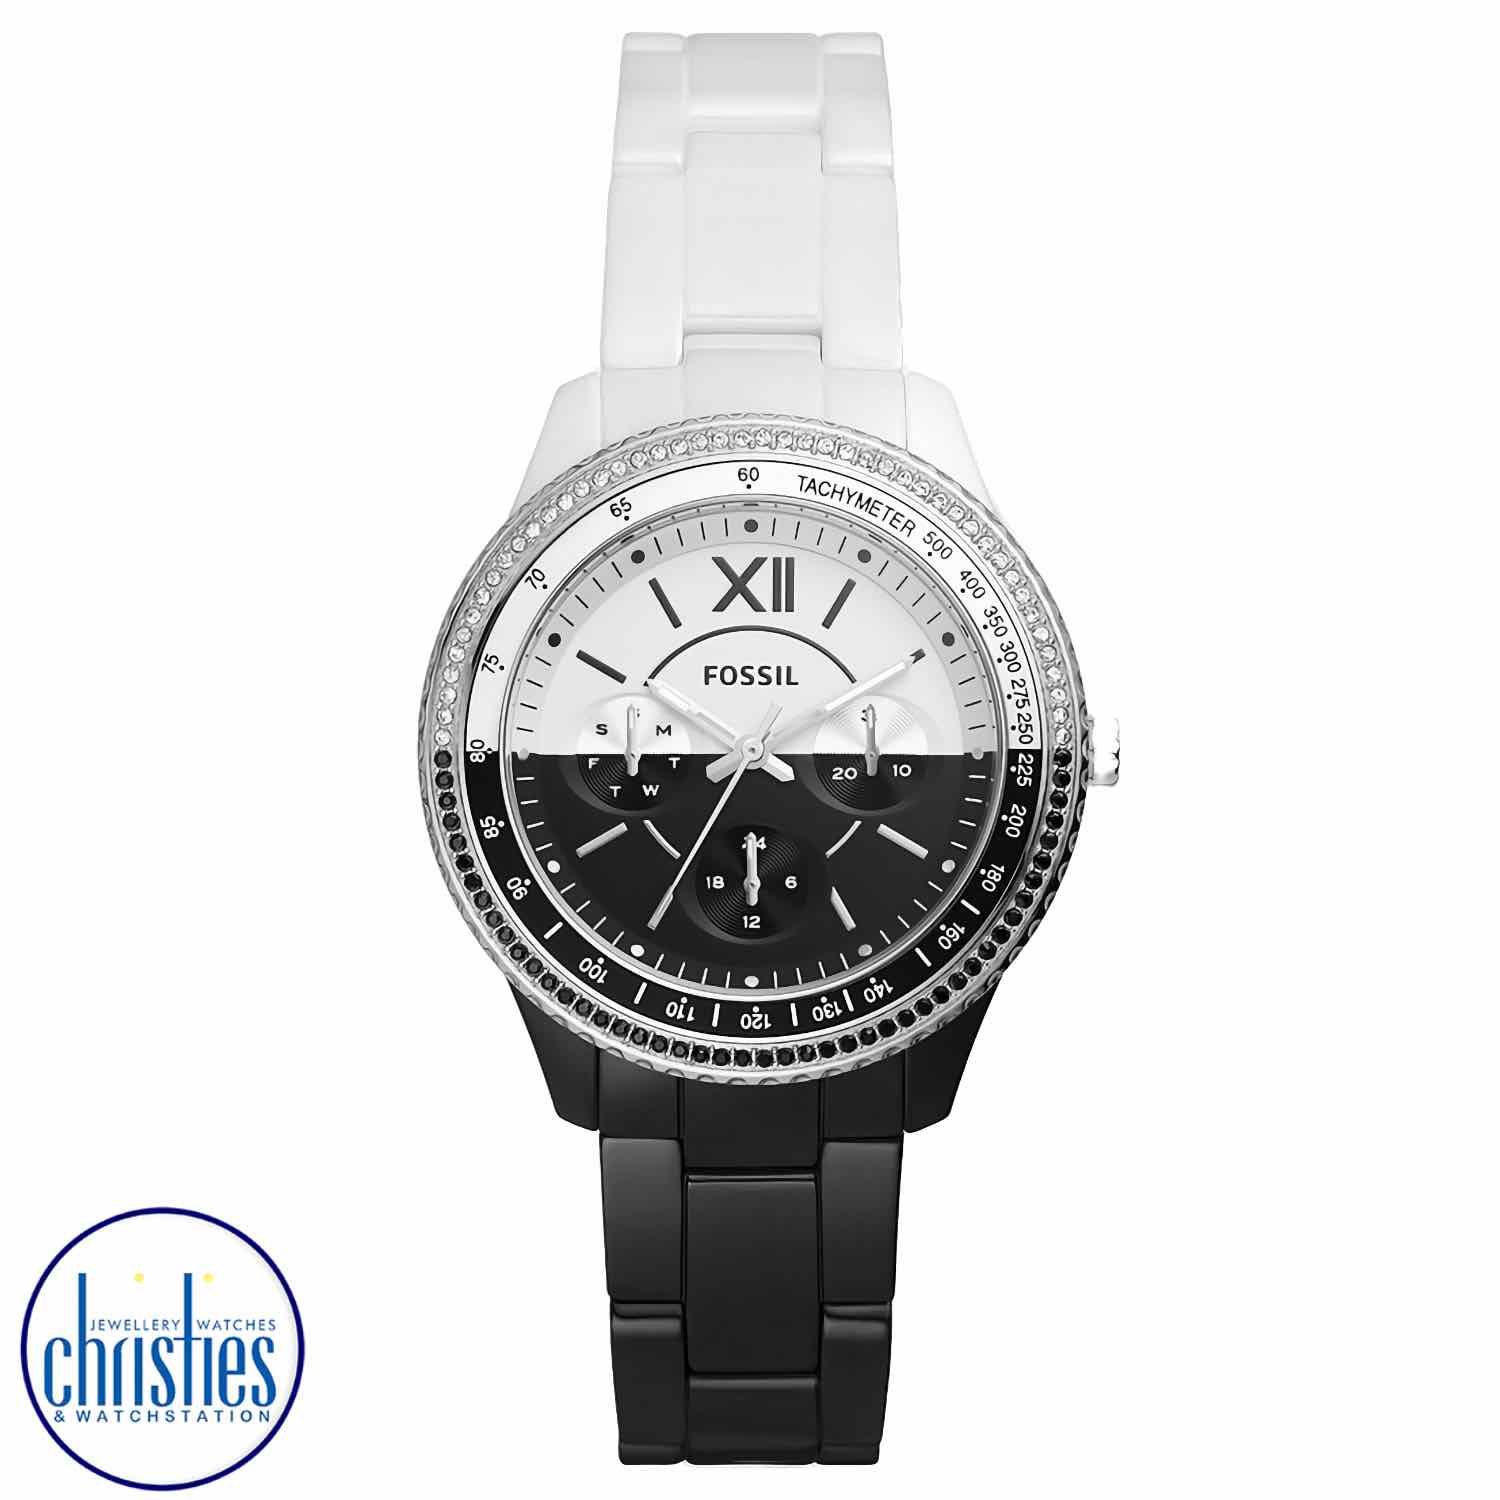 CE1118 Fossil Stella Multifunction Black and White Ceramic Watch. CE1118 Fossil Stella Multifunction Black and White Ceramic WatchAfterpay - Split your purchase into 4 instalments - Pay for your purchase over 4 instalments, due every two weeks.